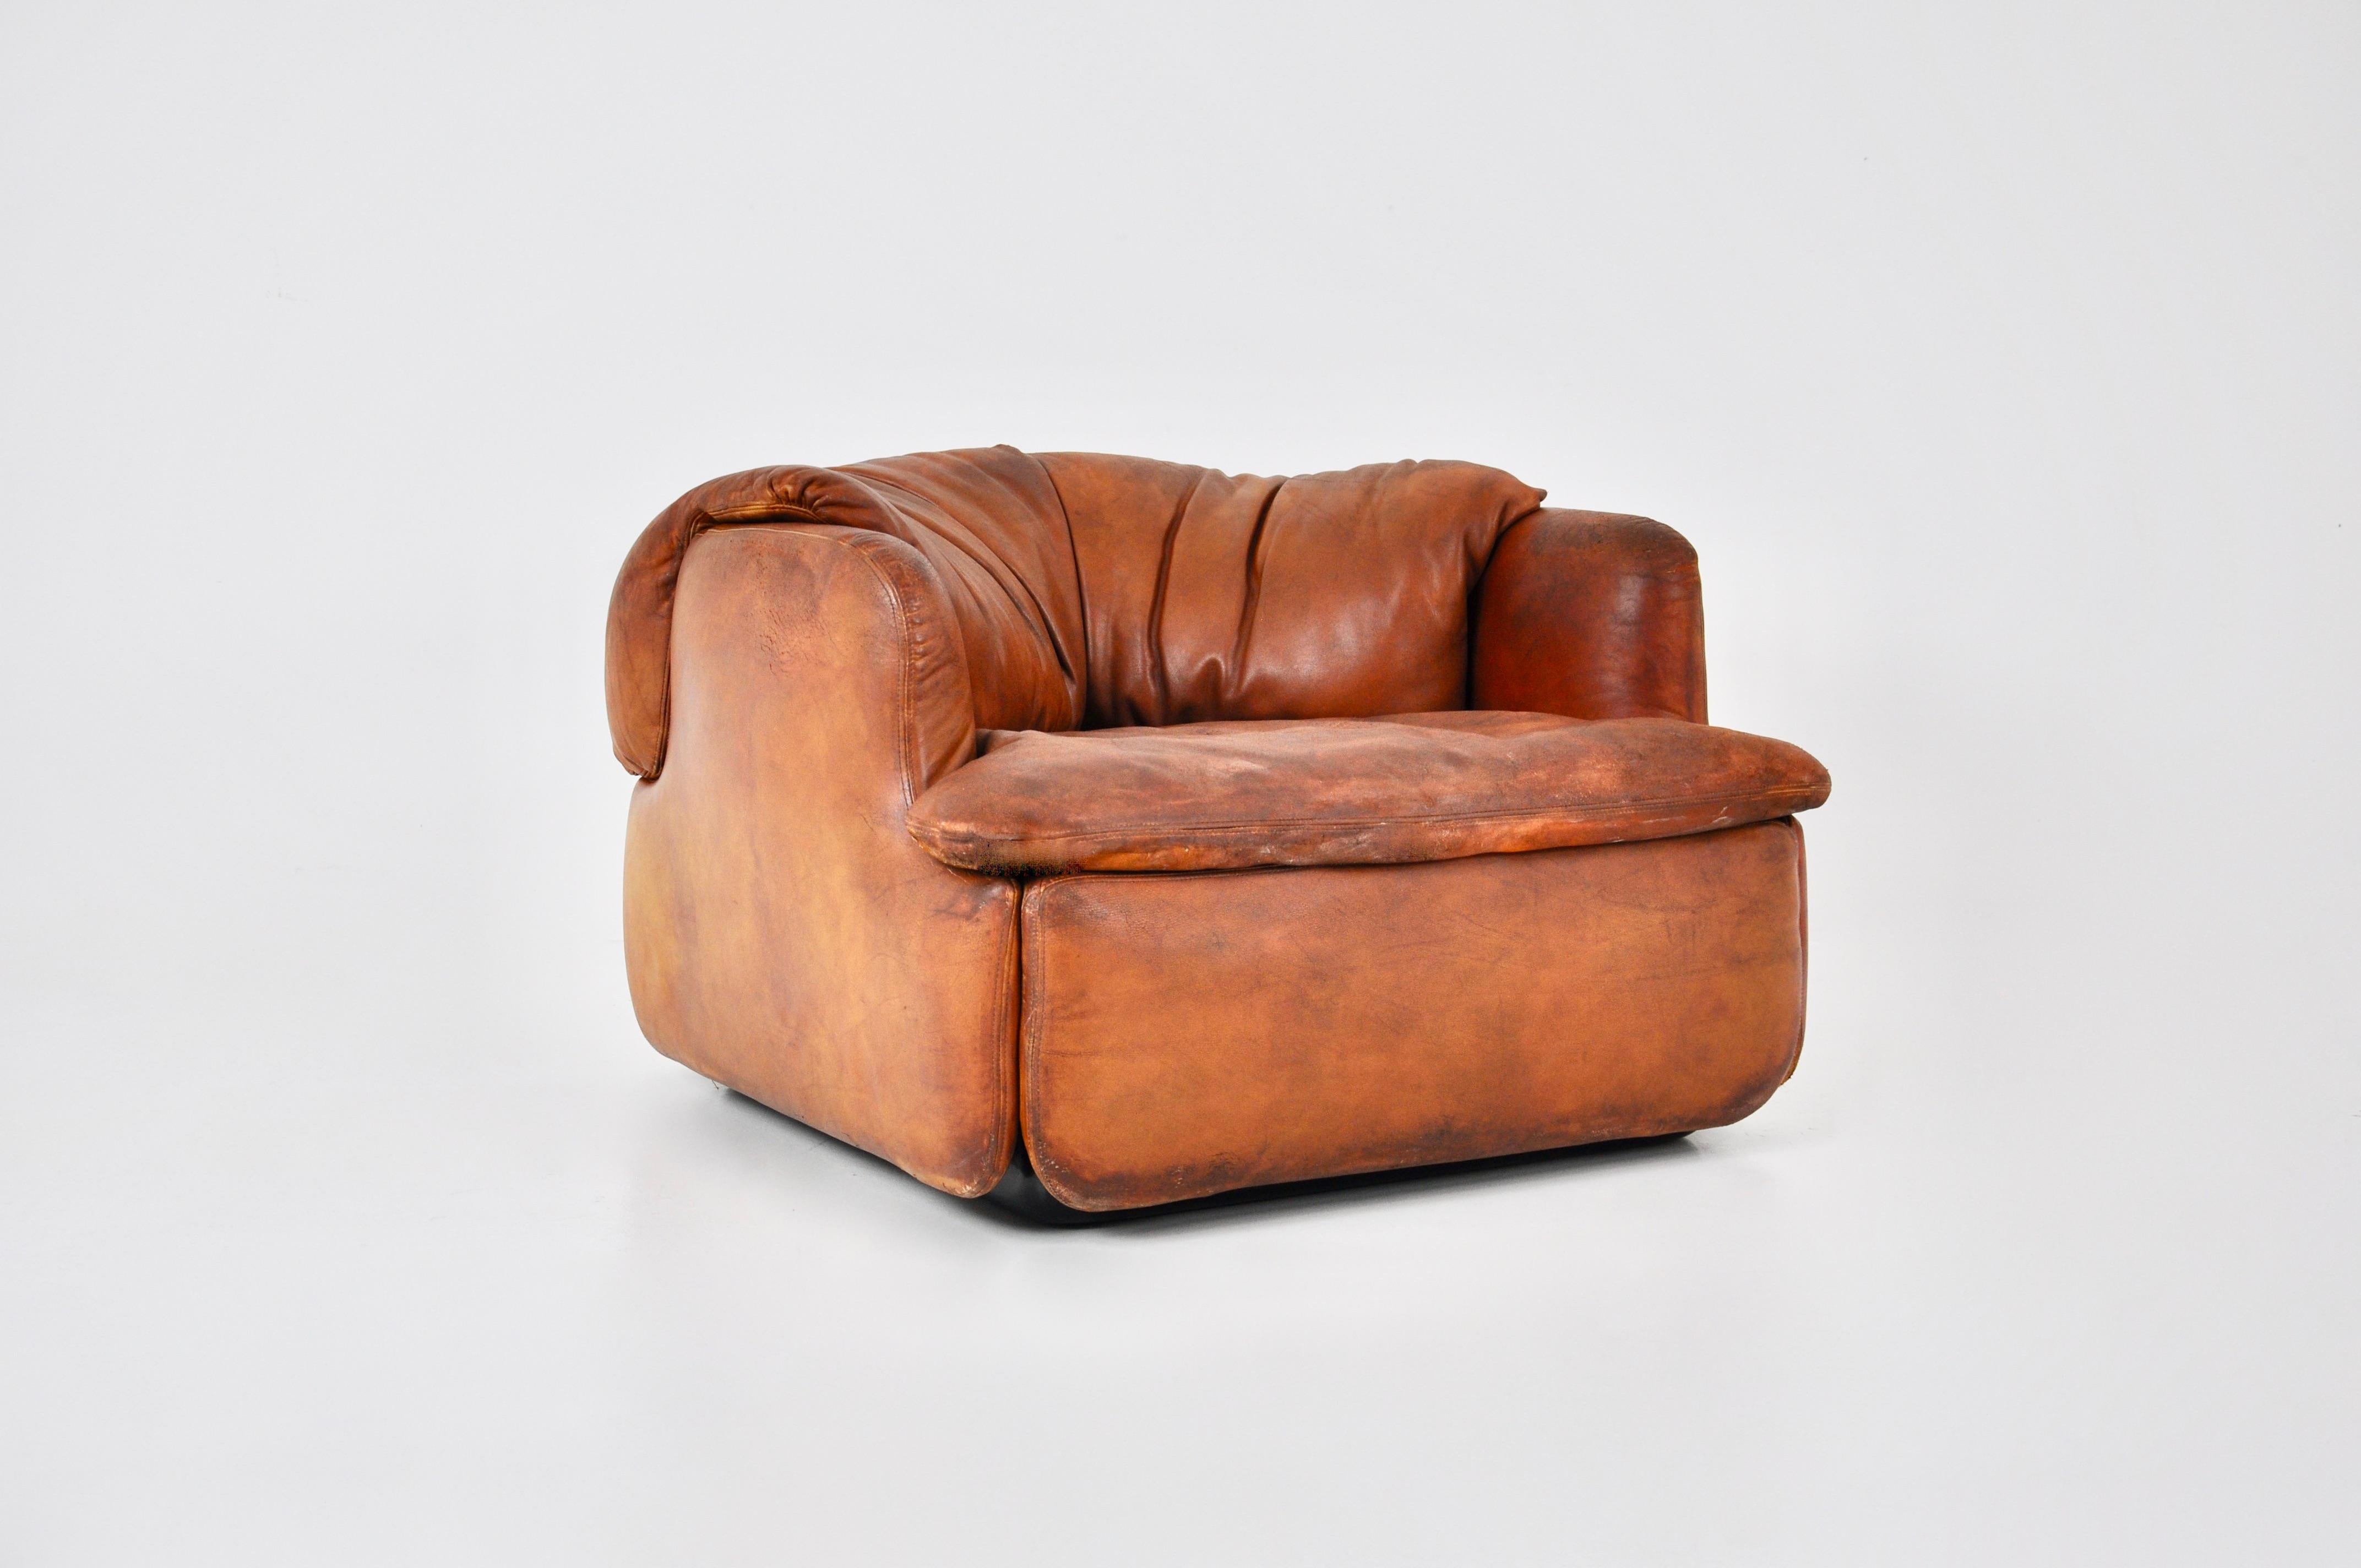 Cognac leather armchair with plastic feet. Stamped Saporiti. Seat height 36cm. Wear due to time and age of the sofa.
 